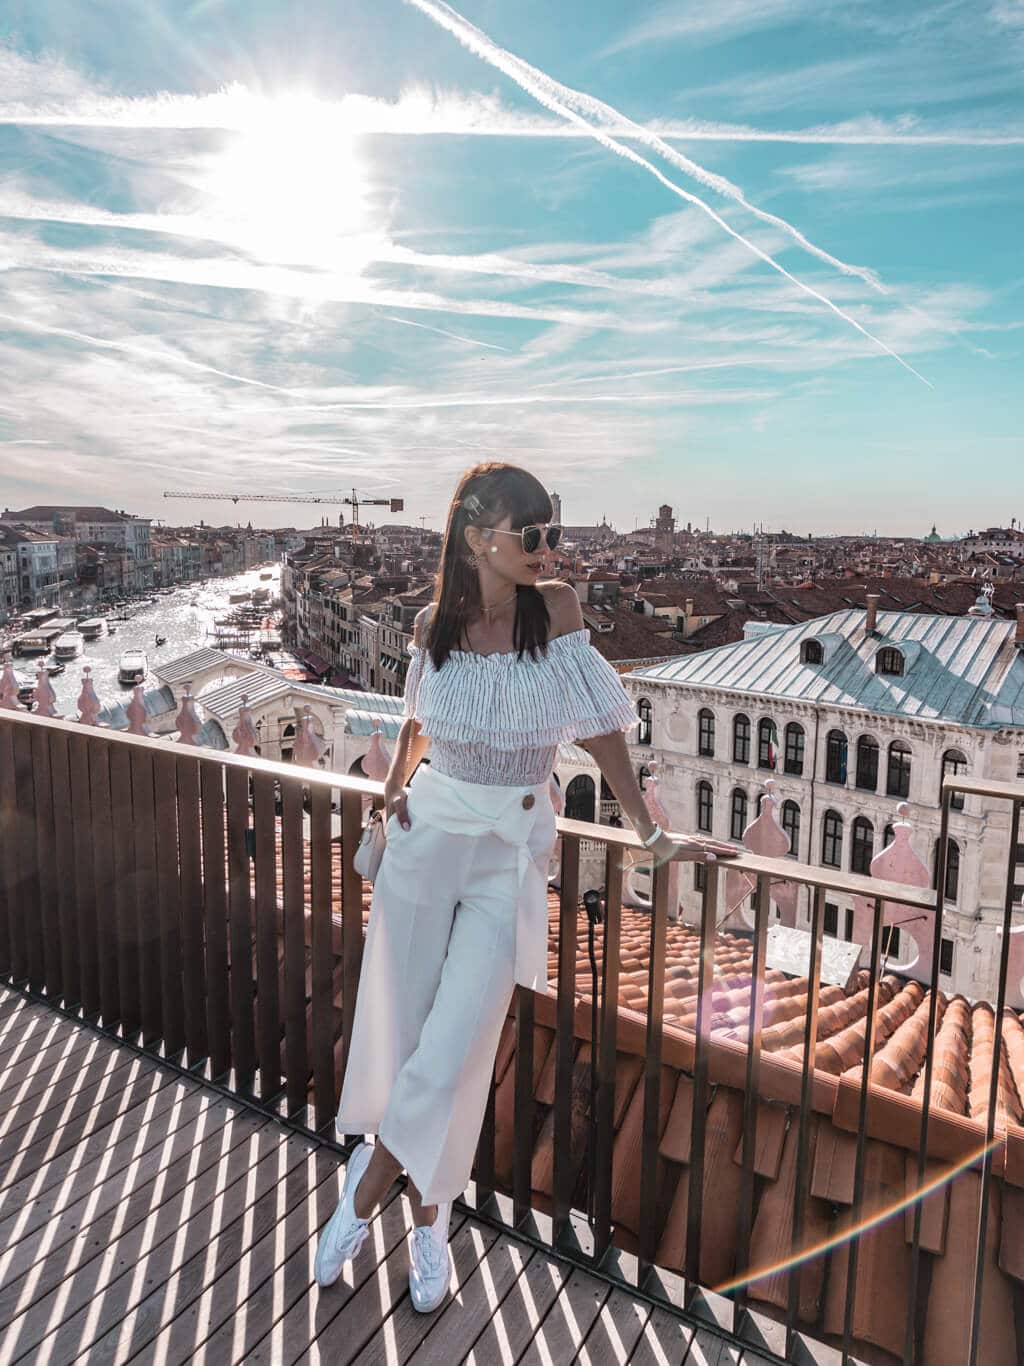 Instagram Outfits Round Up: Traveling In Italy